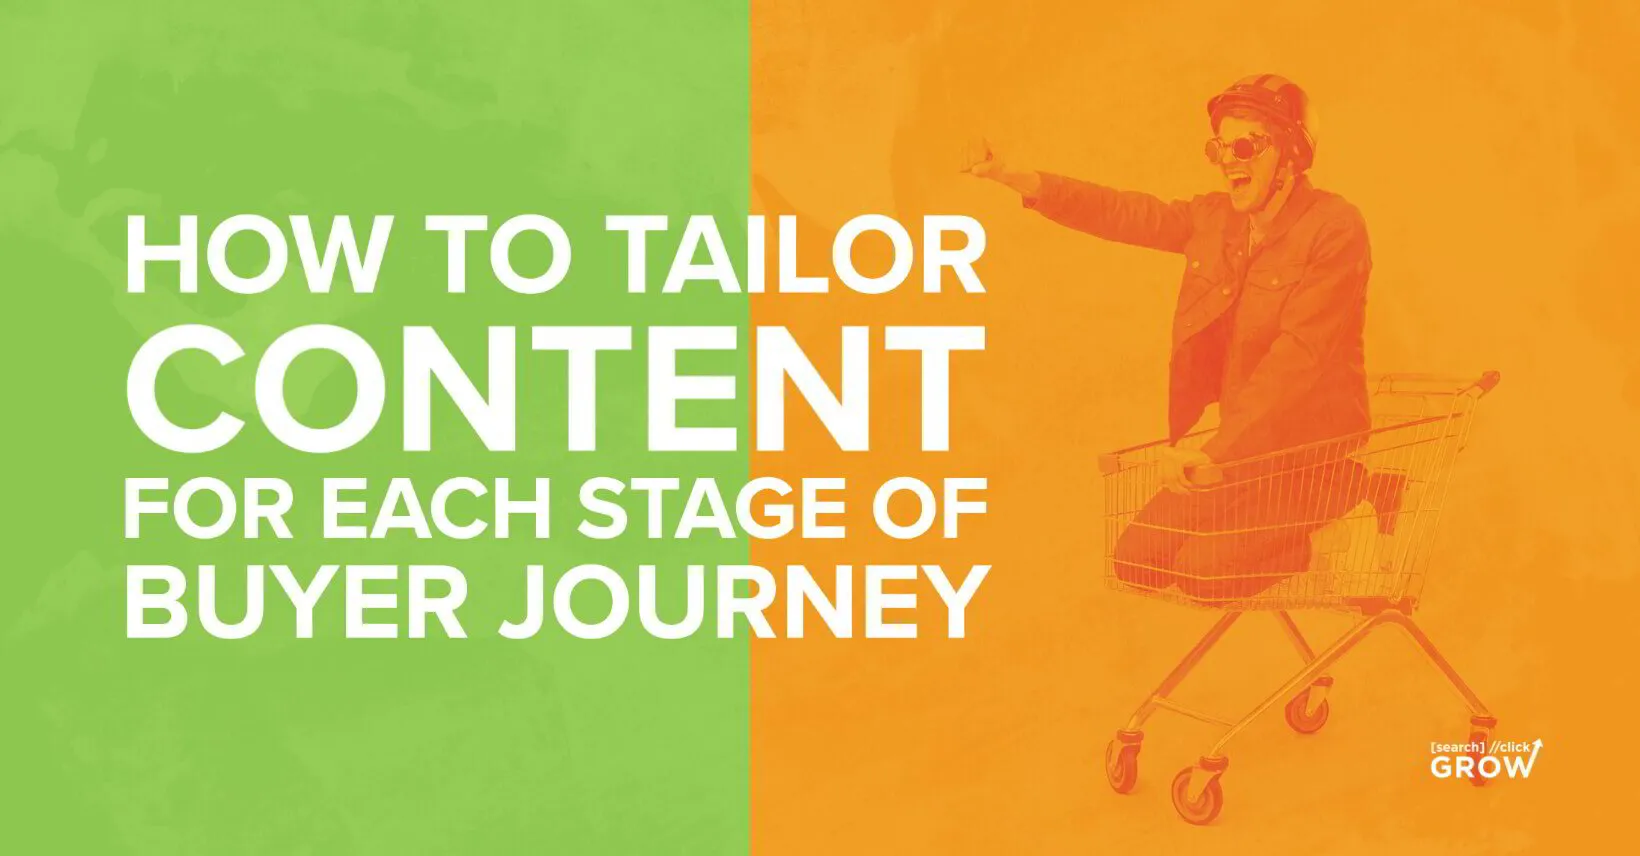 How to Tailor Content for Each Stage of Buyer Journey